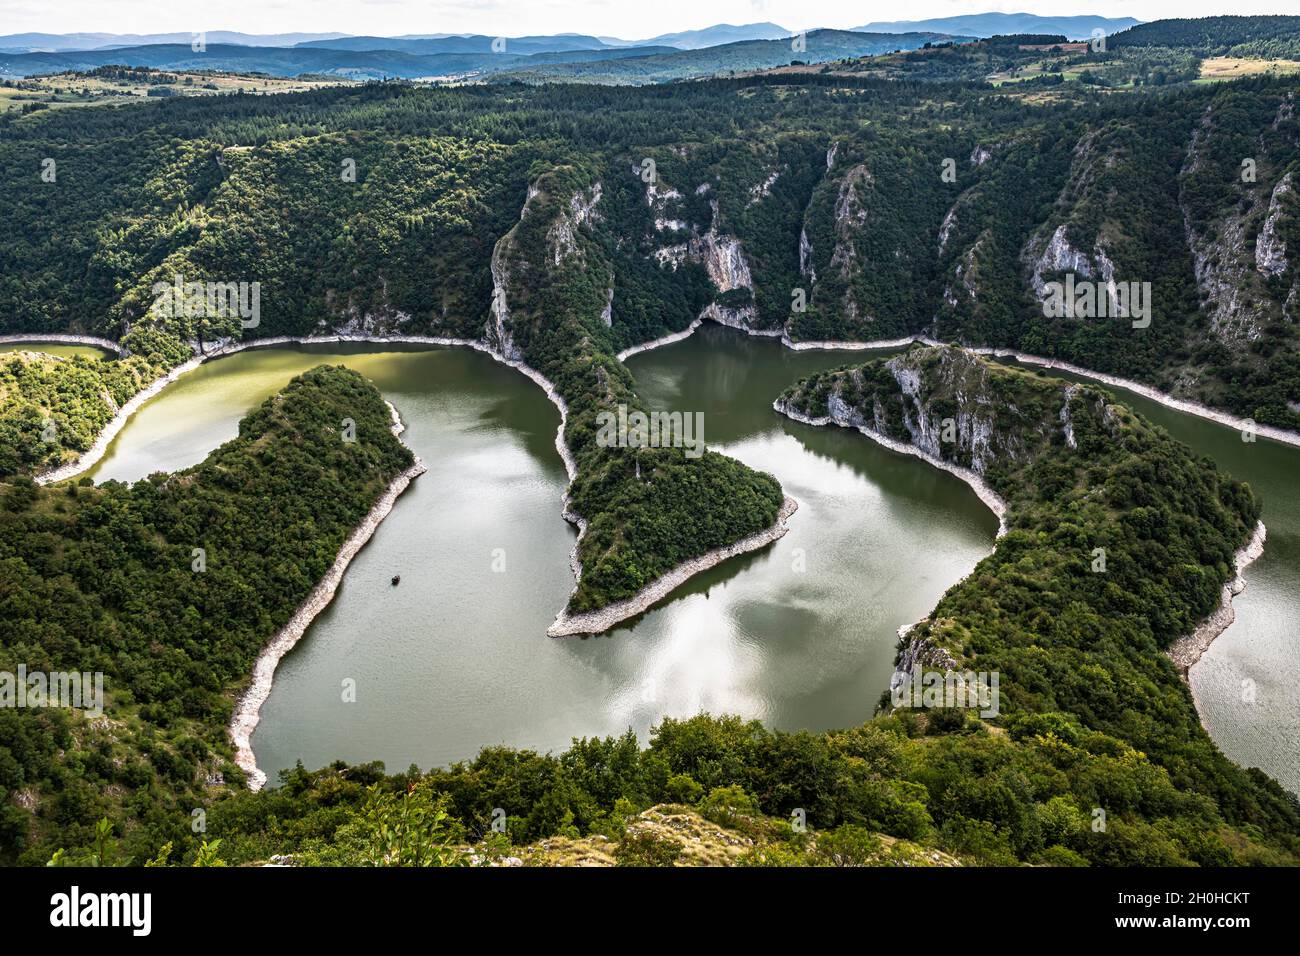 Uvac river meandering through the mountains, Uvac Special Nature Reserve, Serbia Stock Photo